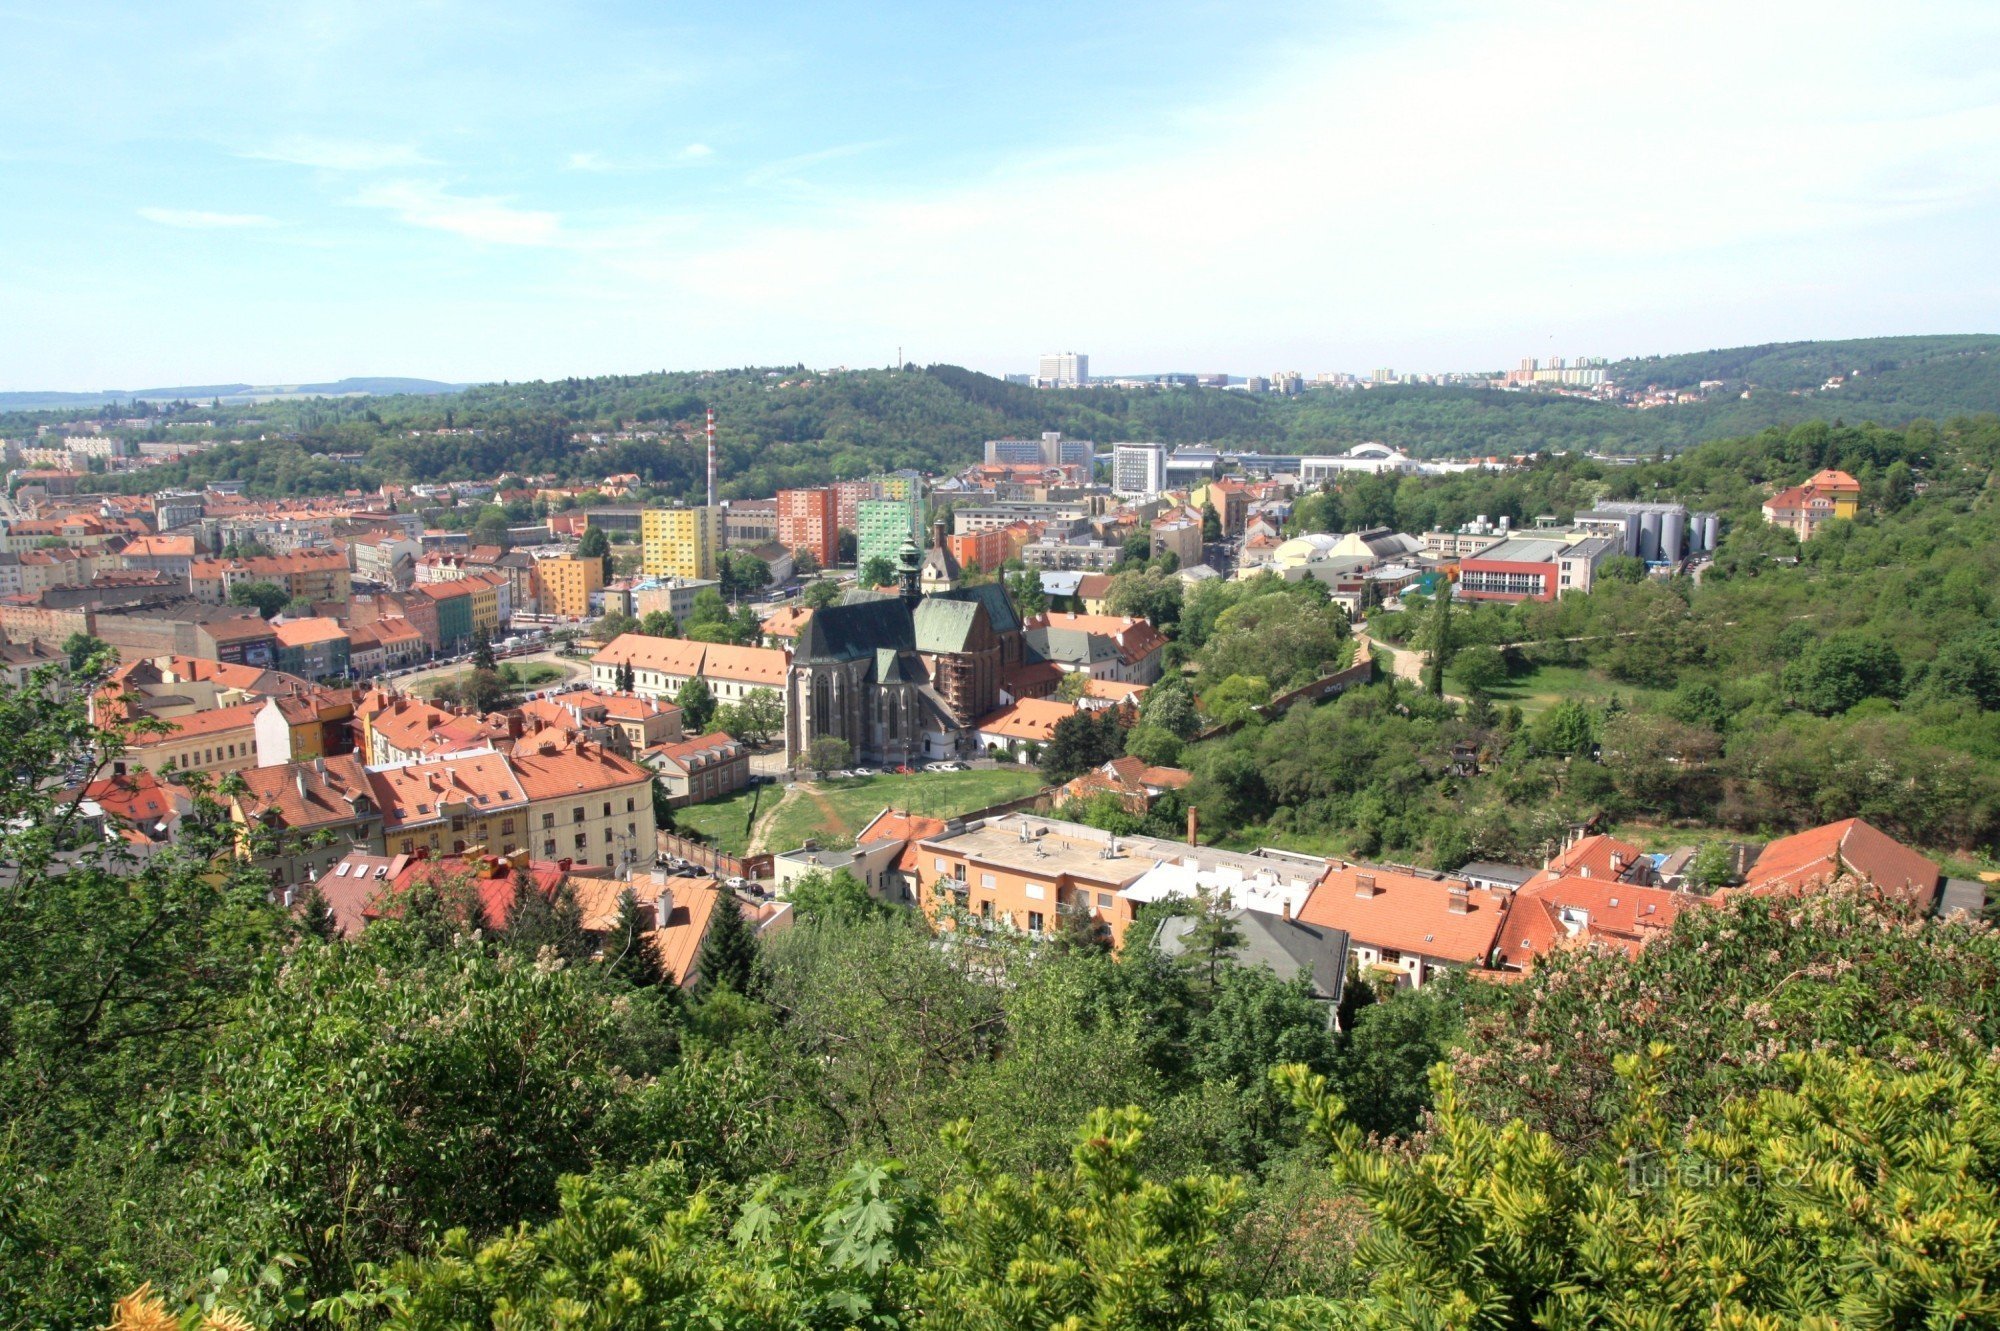 View of a part of Old Brno and the Exhibition Center